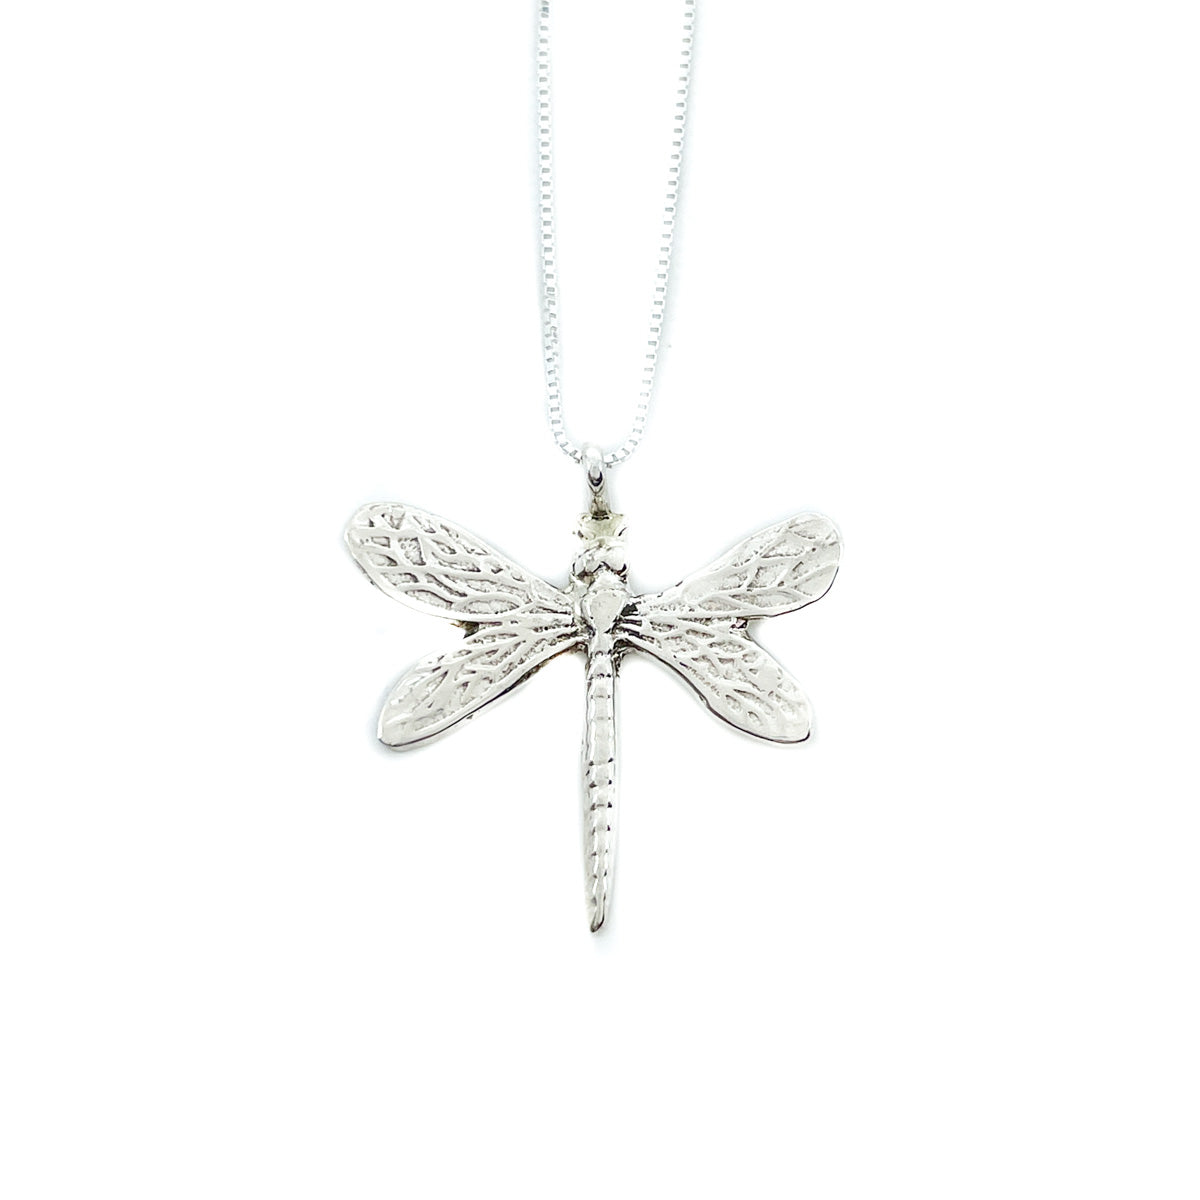 Load image into Gallery viewer, Sterling silver dragonfly pendant with sterling silver chain Pendant measures approx. 1.25 inches long with 1.25 inch wide wingspan 18 inch chain with spring ring clasp
